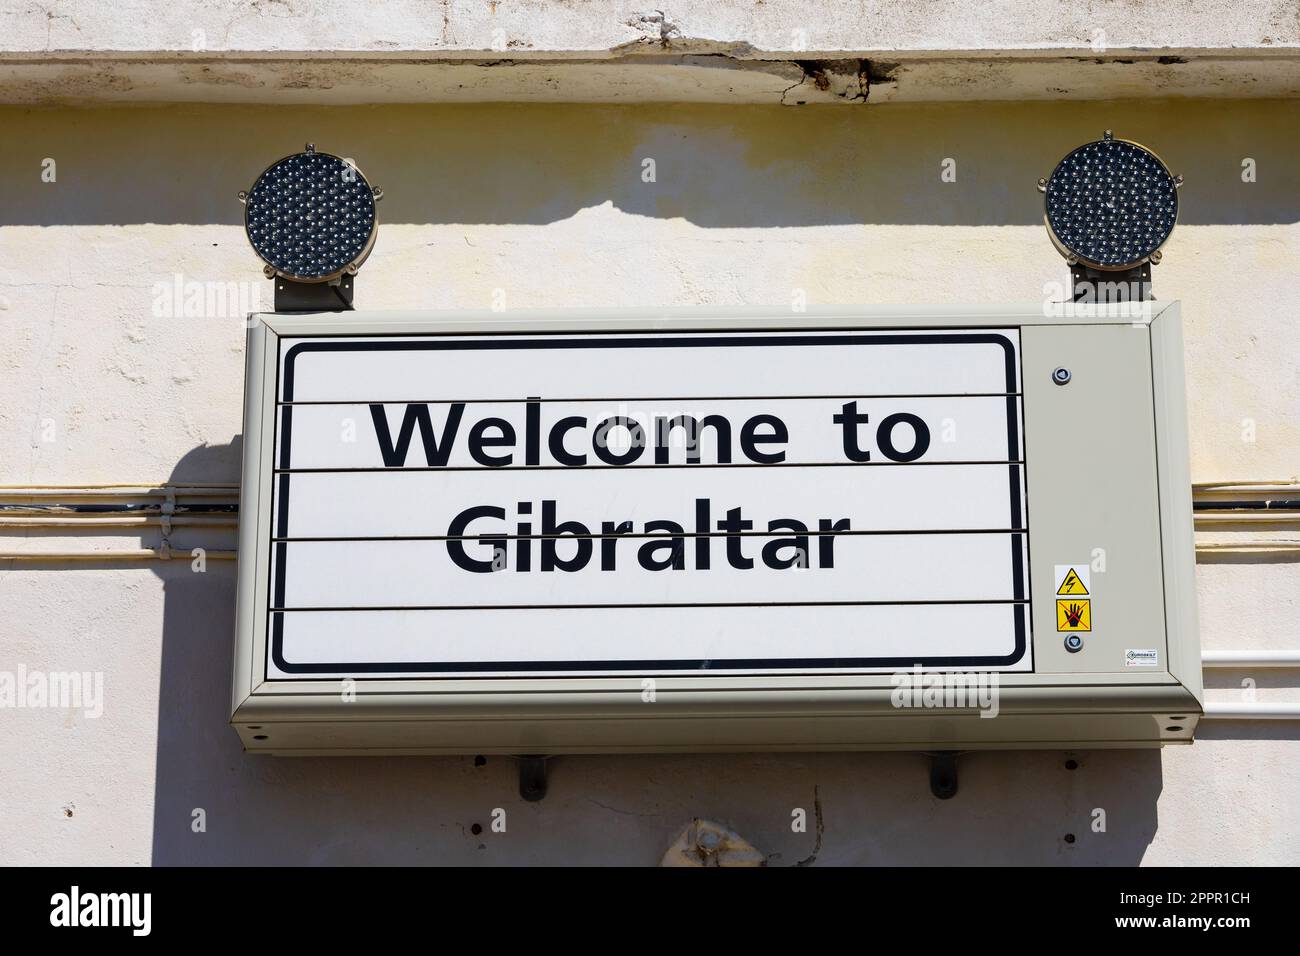 Welcome to Gibraltar sign with lights. North Mole Road. The British Overseas Territory of Gibraltar, the Rock of Gibraltar on the Iberian Peninsula. Stock Photo